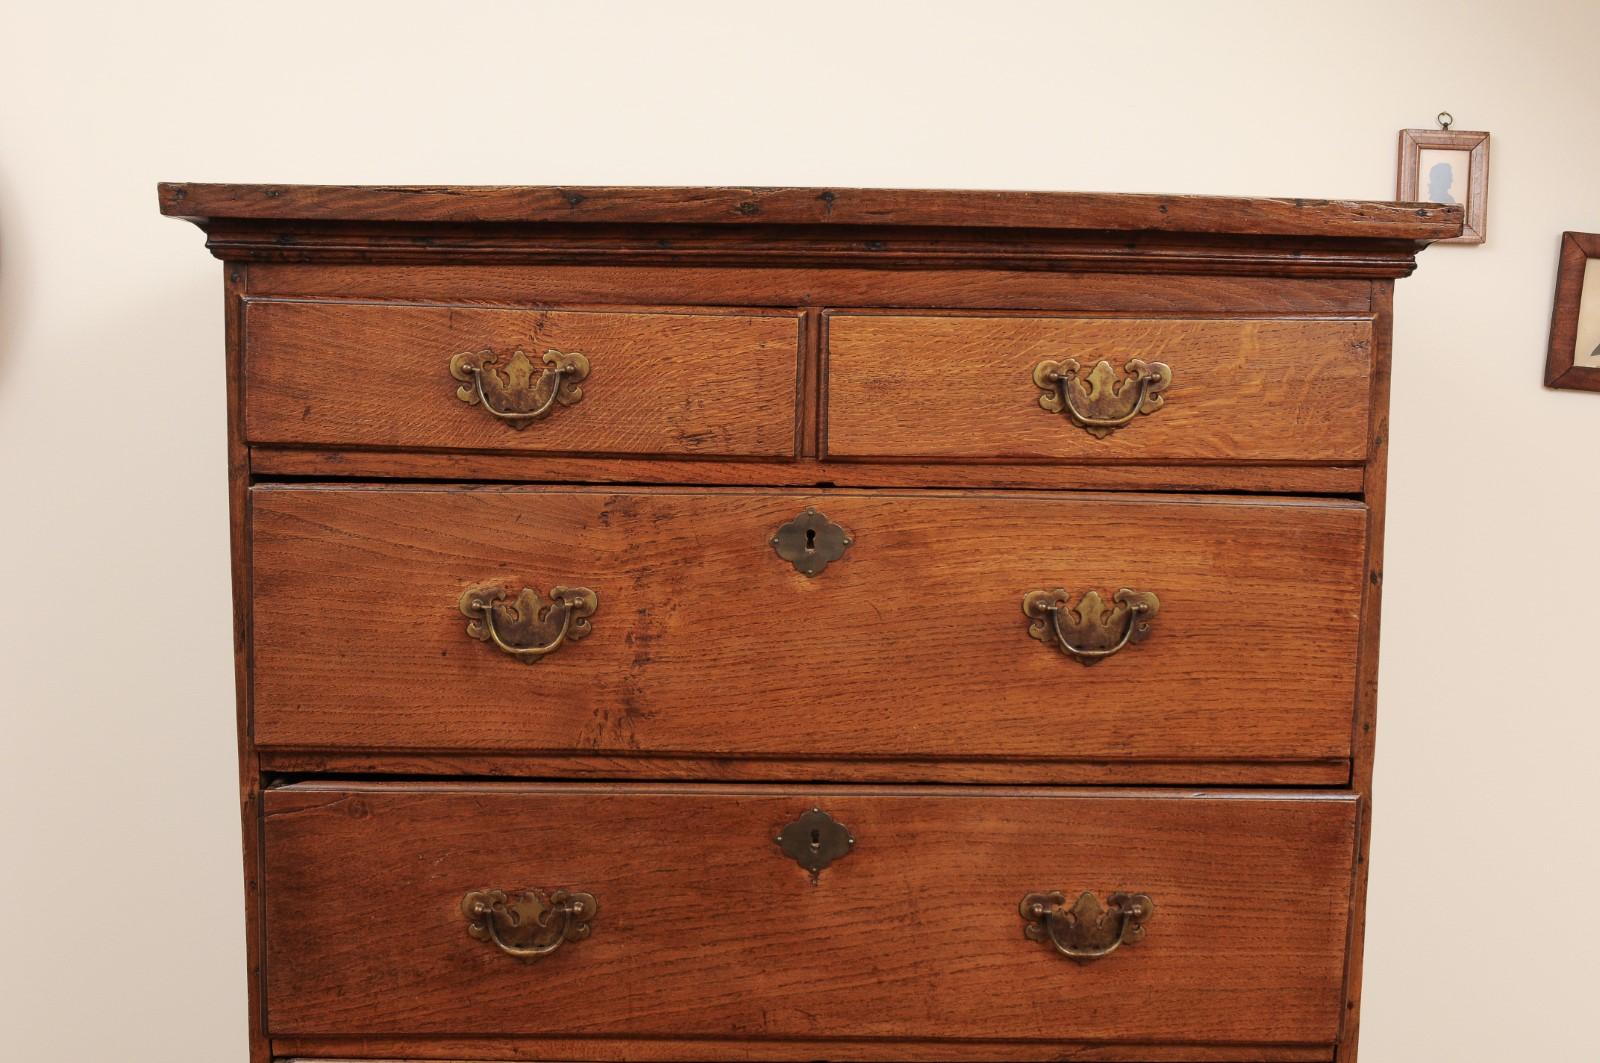 19th Century English Georgian Period 1820s Oak Highboy with Seven Drawers and Cabriole Legs